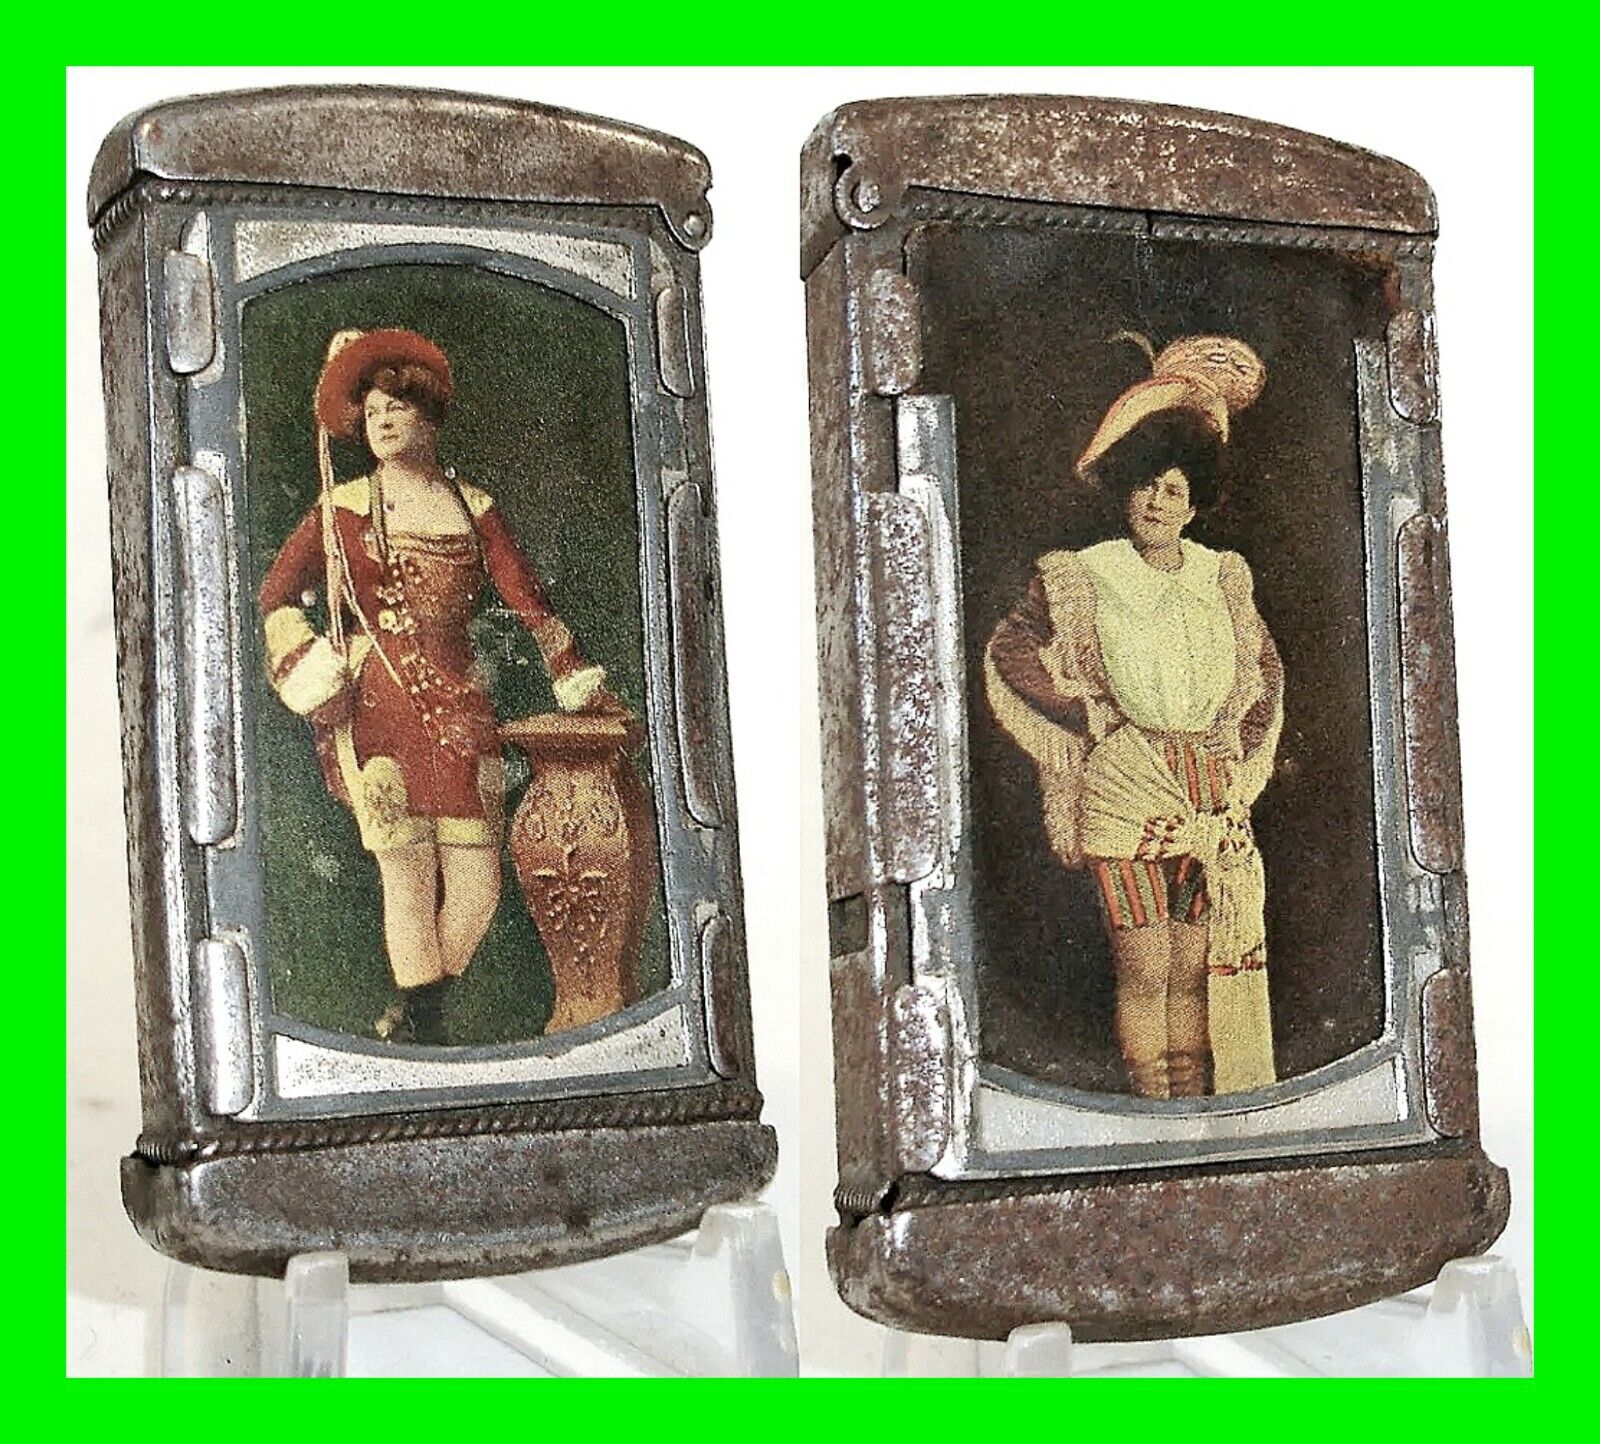 Antique Victorian Double Sided Match Safe Image Of Woman In Risque Dress Outfits